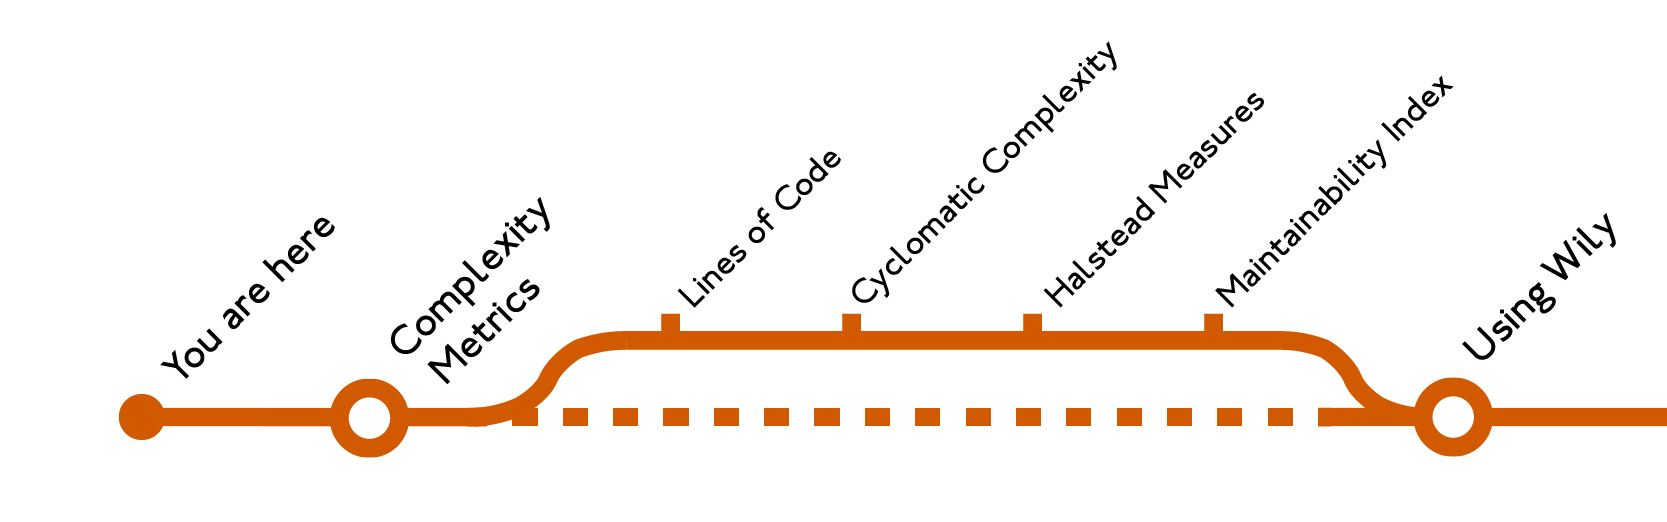 Code Complexity Metrics Table of Contents